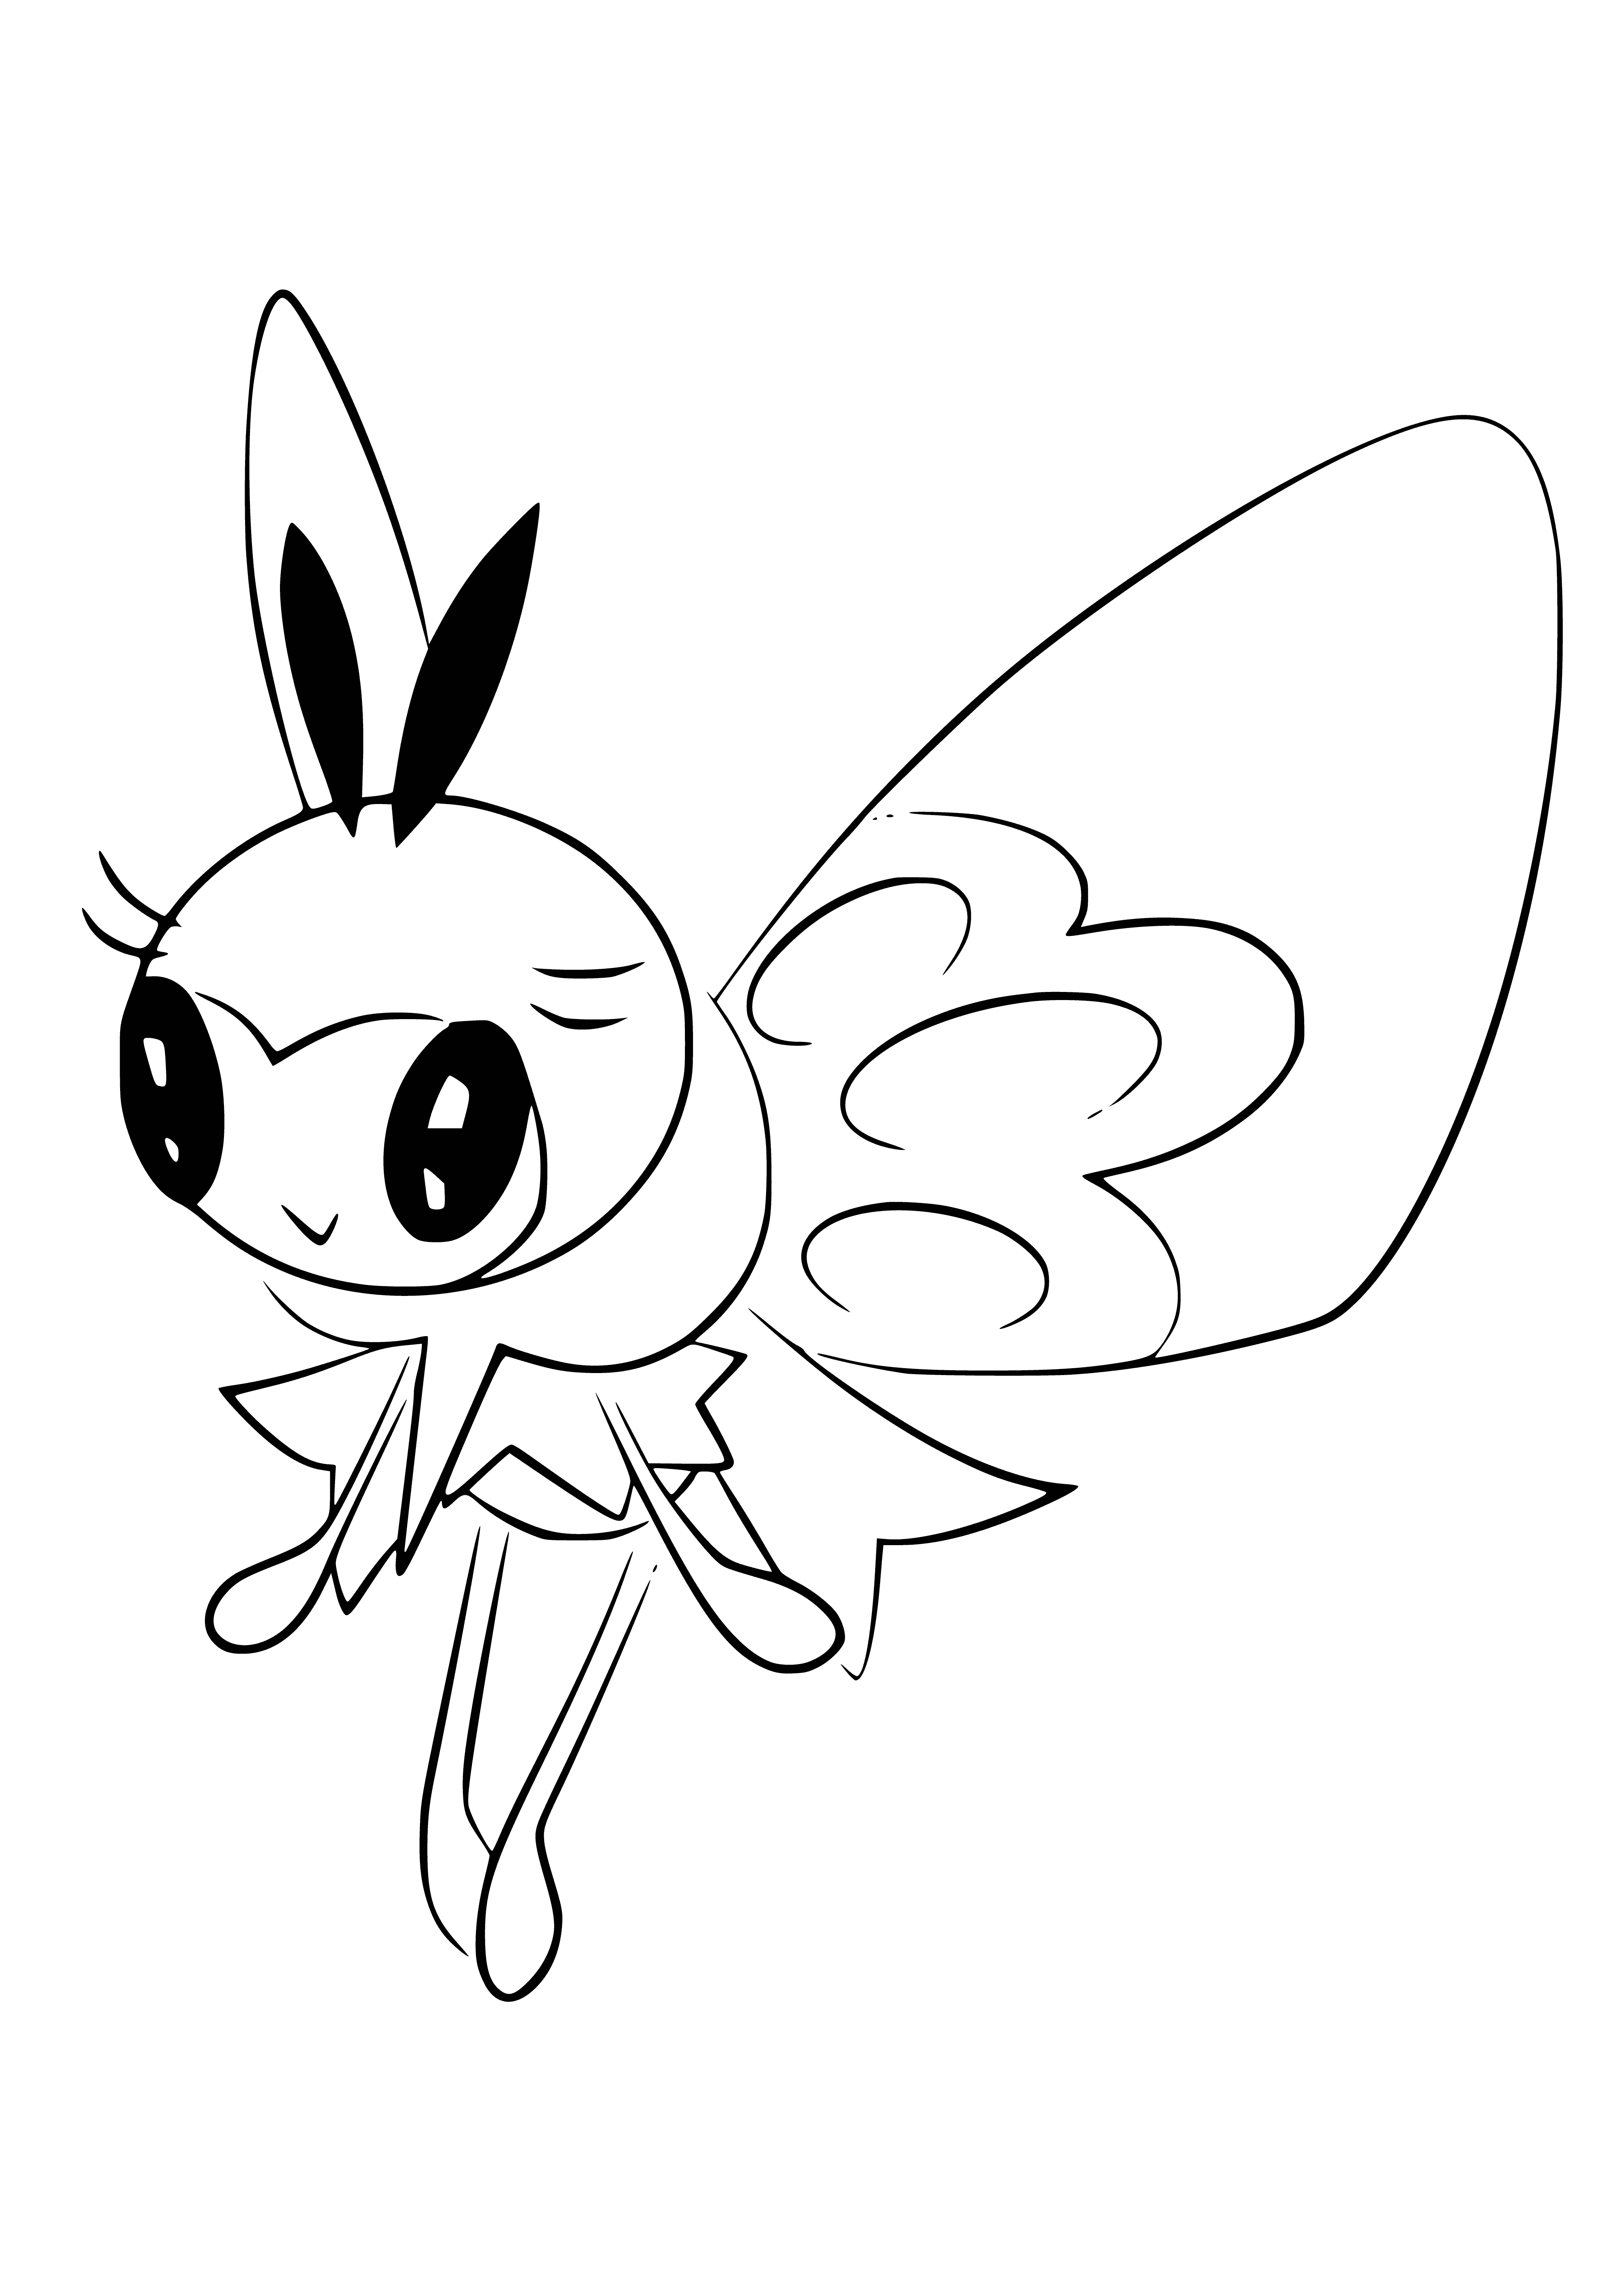 coloring page: Small yellow and black Pokémon w/ fuzzy antennae, three spots and wings. Has two black legs.